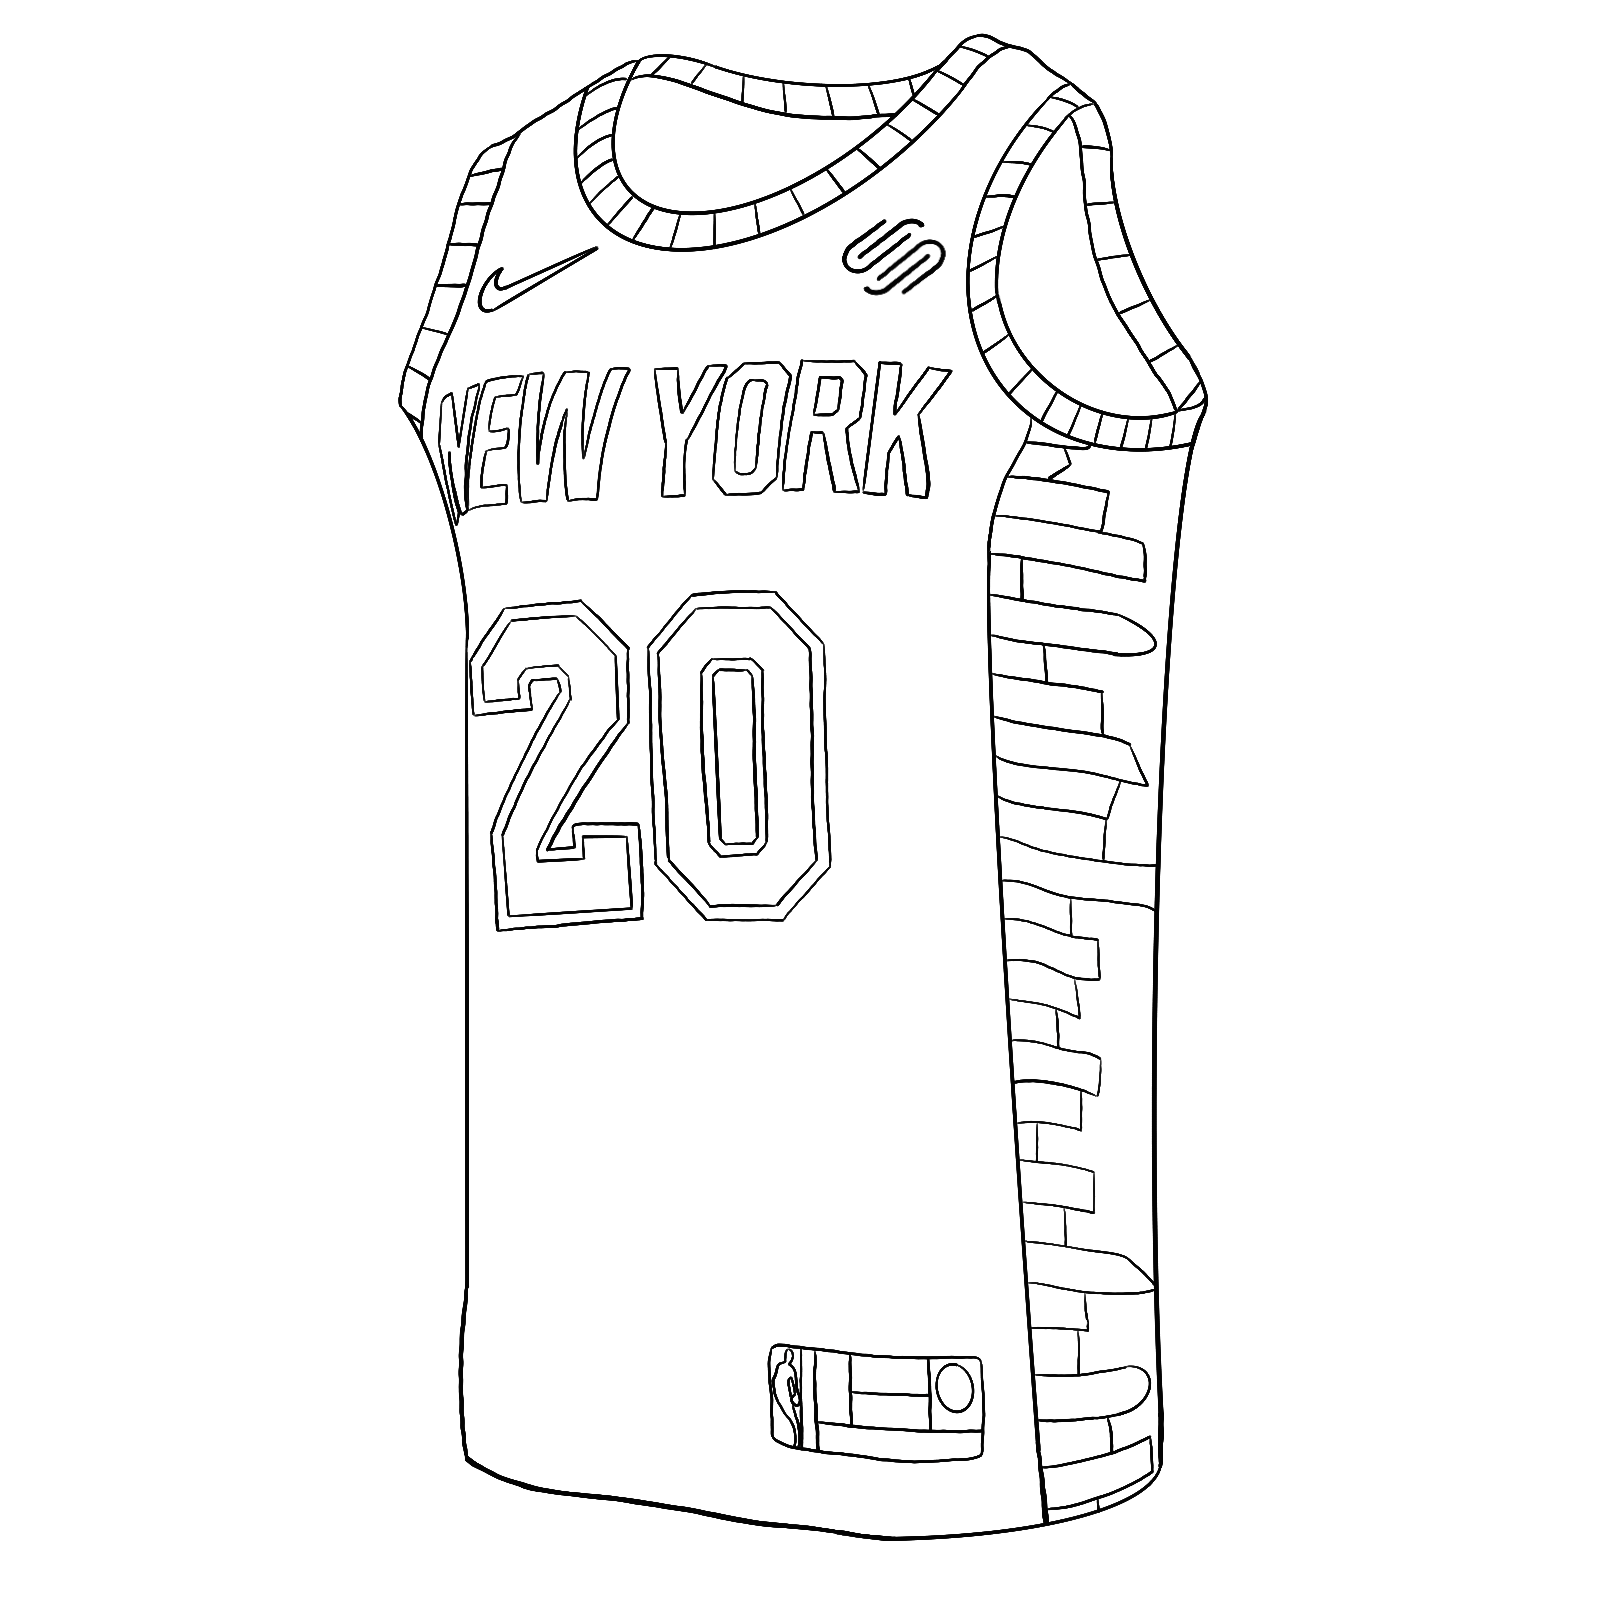 Knicks coloring pages garden of dreams foundation